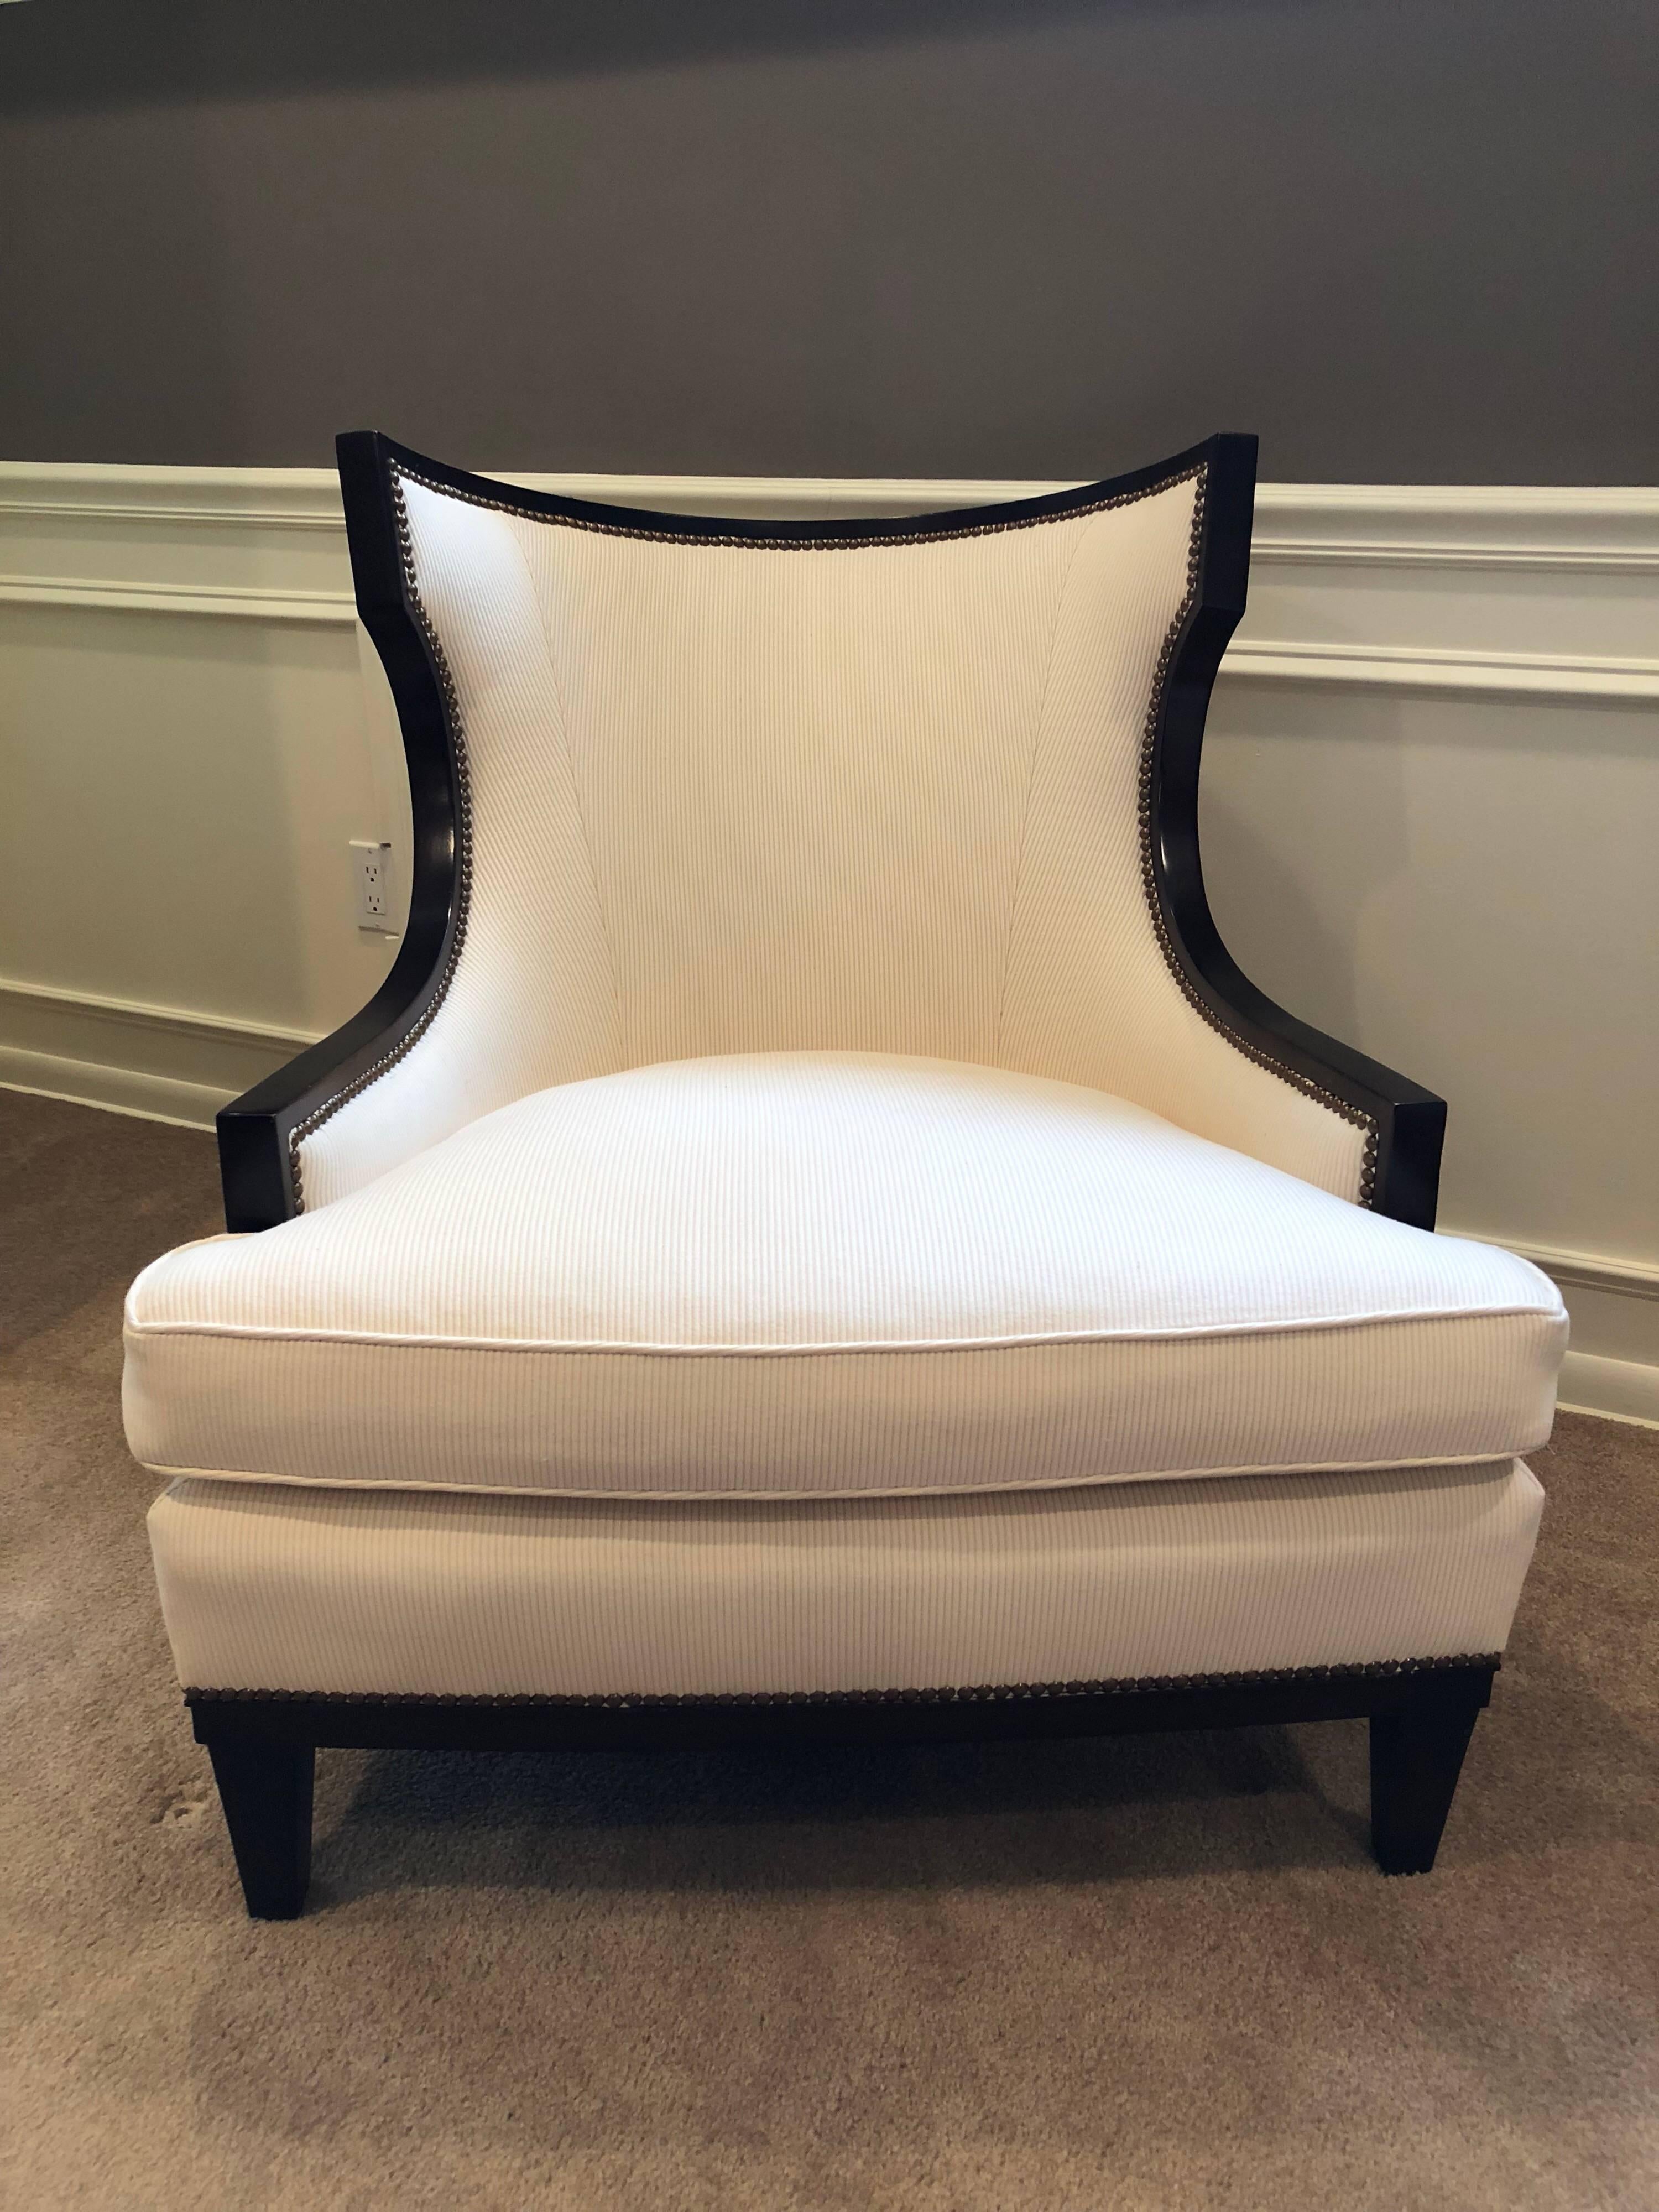 A set of four Barbara Barry curved back armchairs in mahogany with off-white ribbed upholstery.